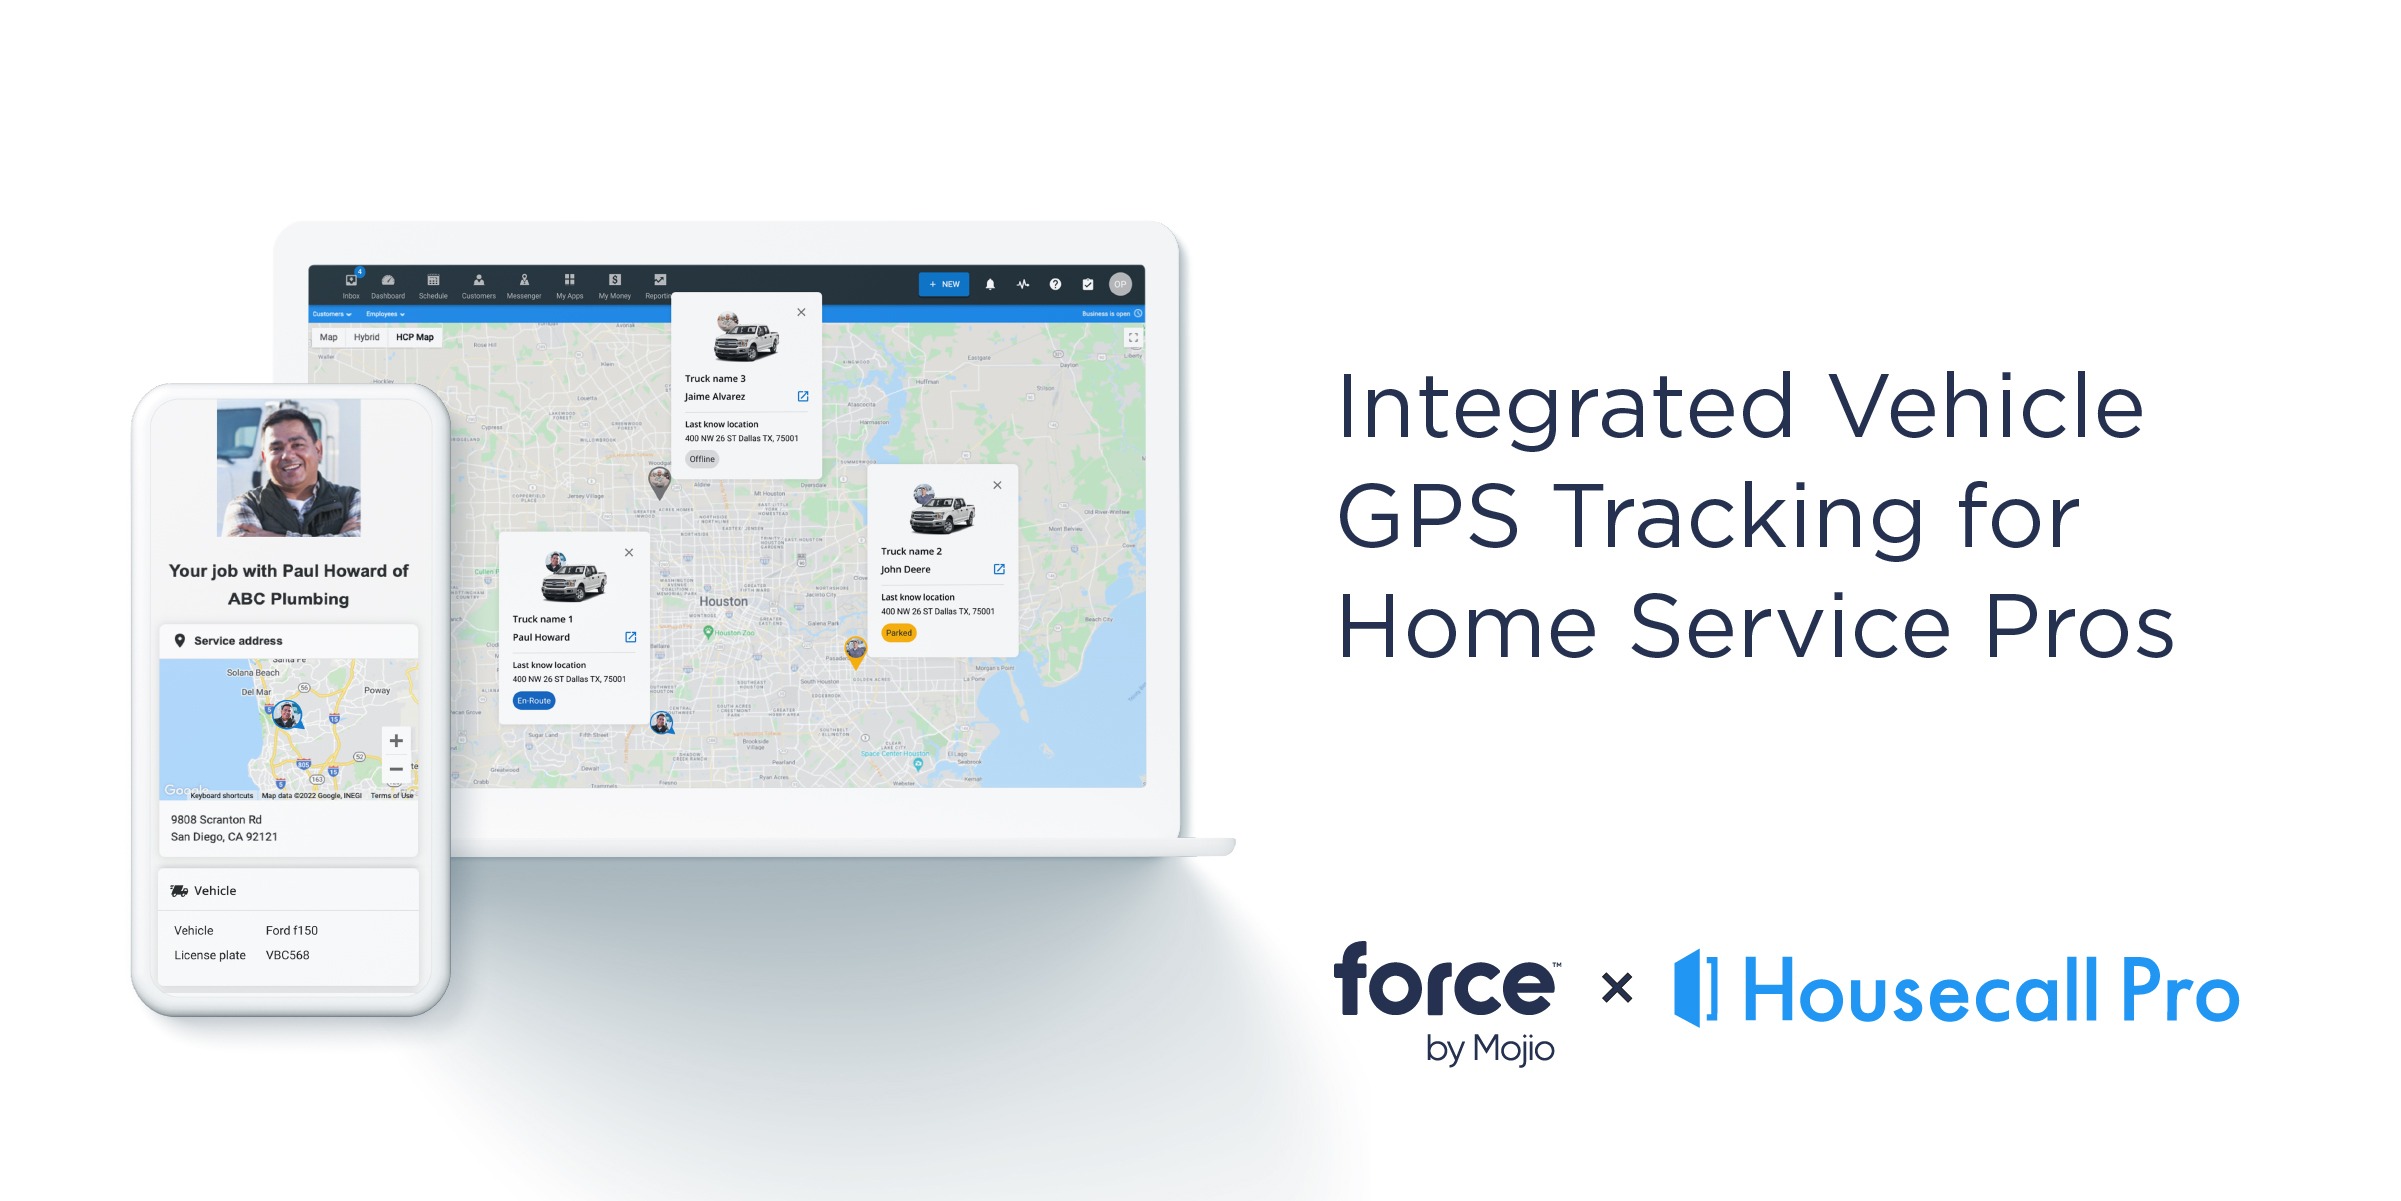 Mojio Partners with Housecall Pro to Launch Integrated Fleet Management Solution for Home Service Businesses